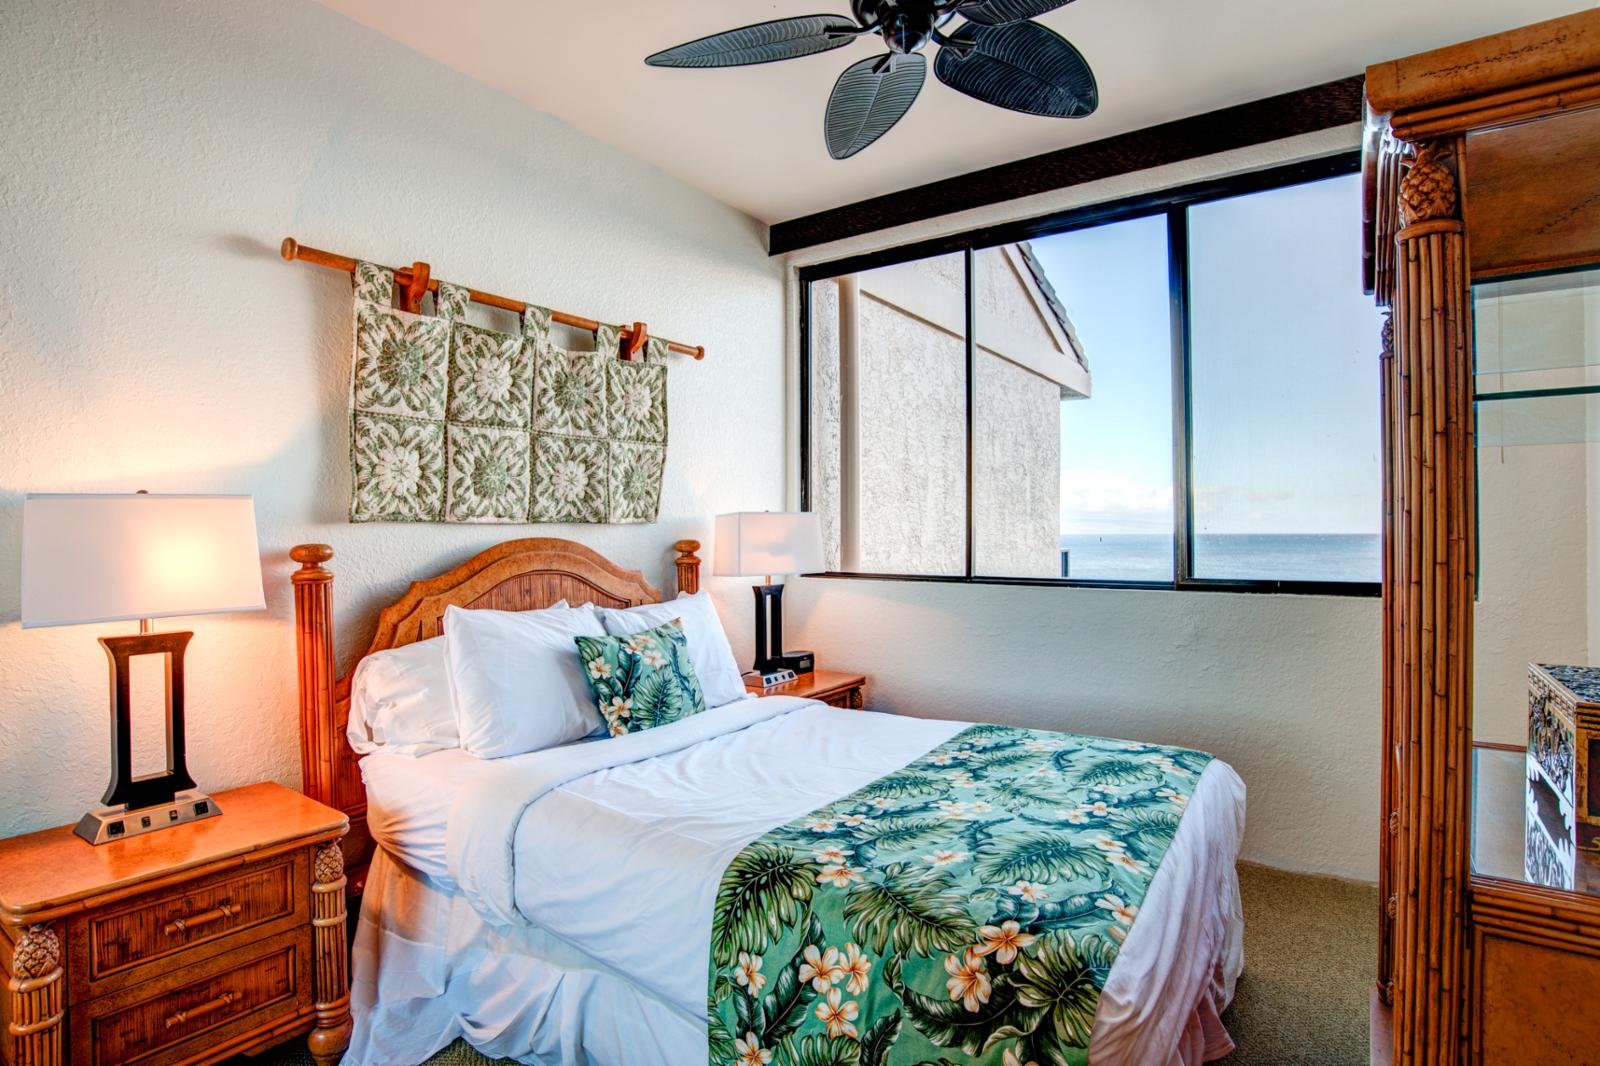 LARGE ocean views and beach chic decor accents